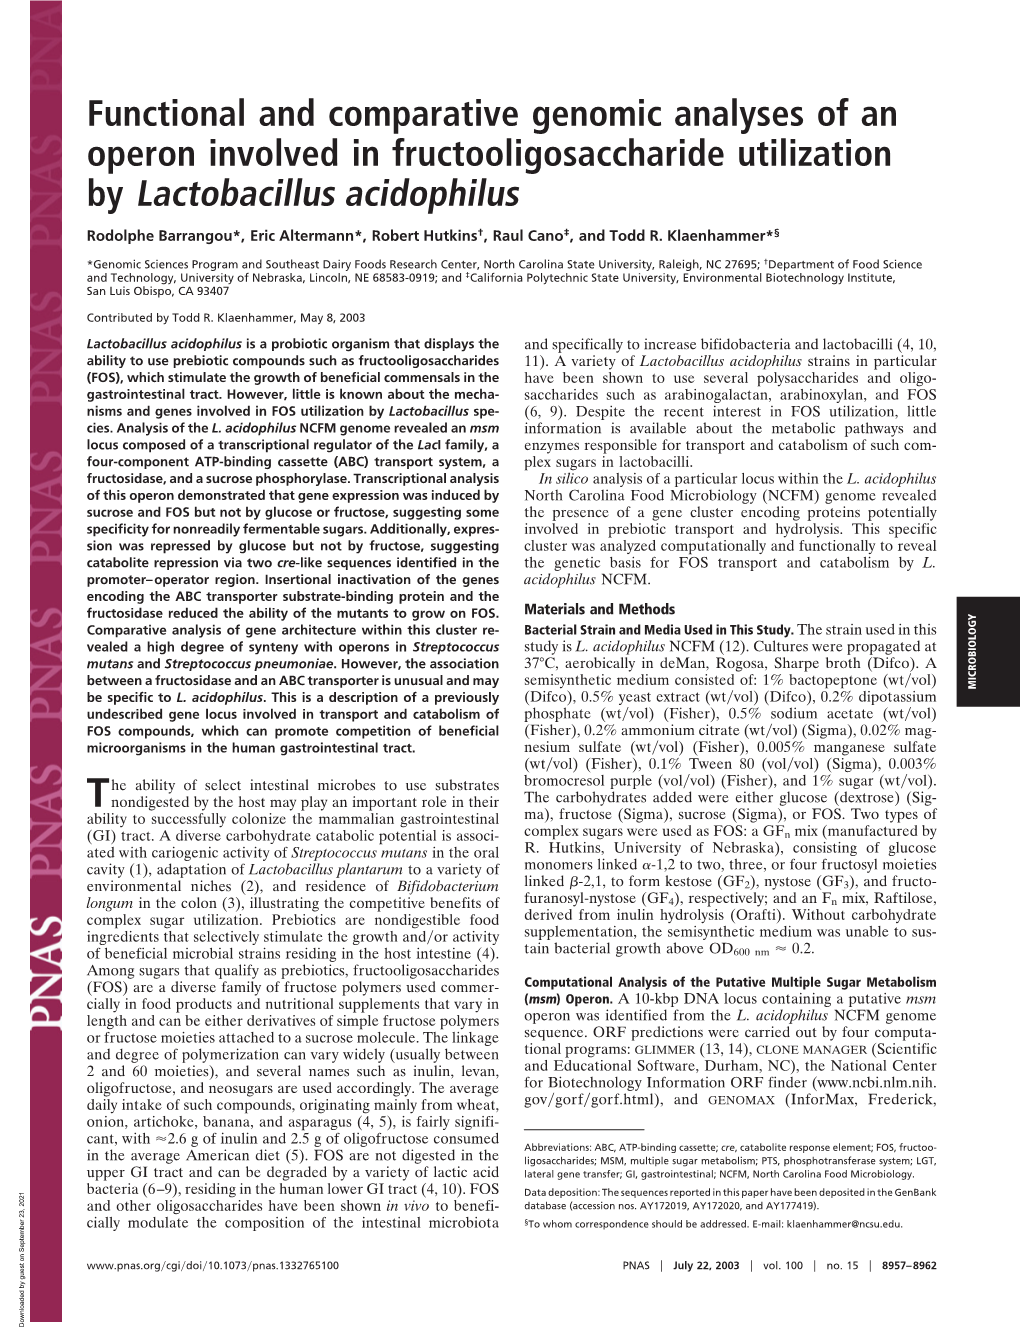 Functional and Comparative Genomic Analyses of an Operon Involved in Fructooligosaccharide Utilization by Lactobacillus Acidophilus